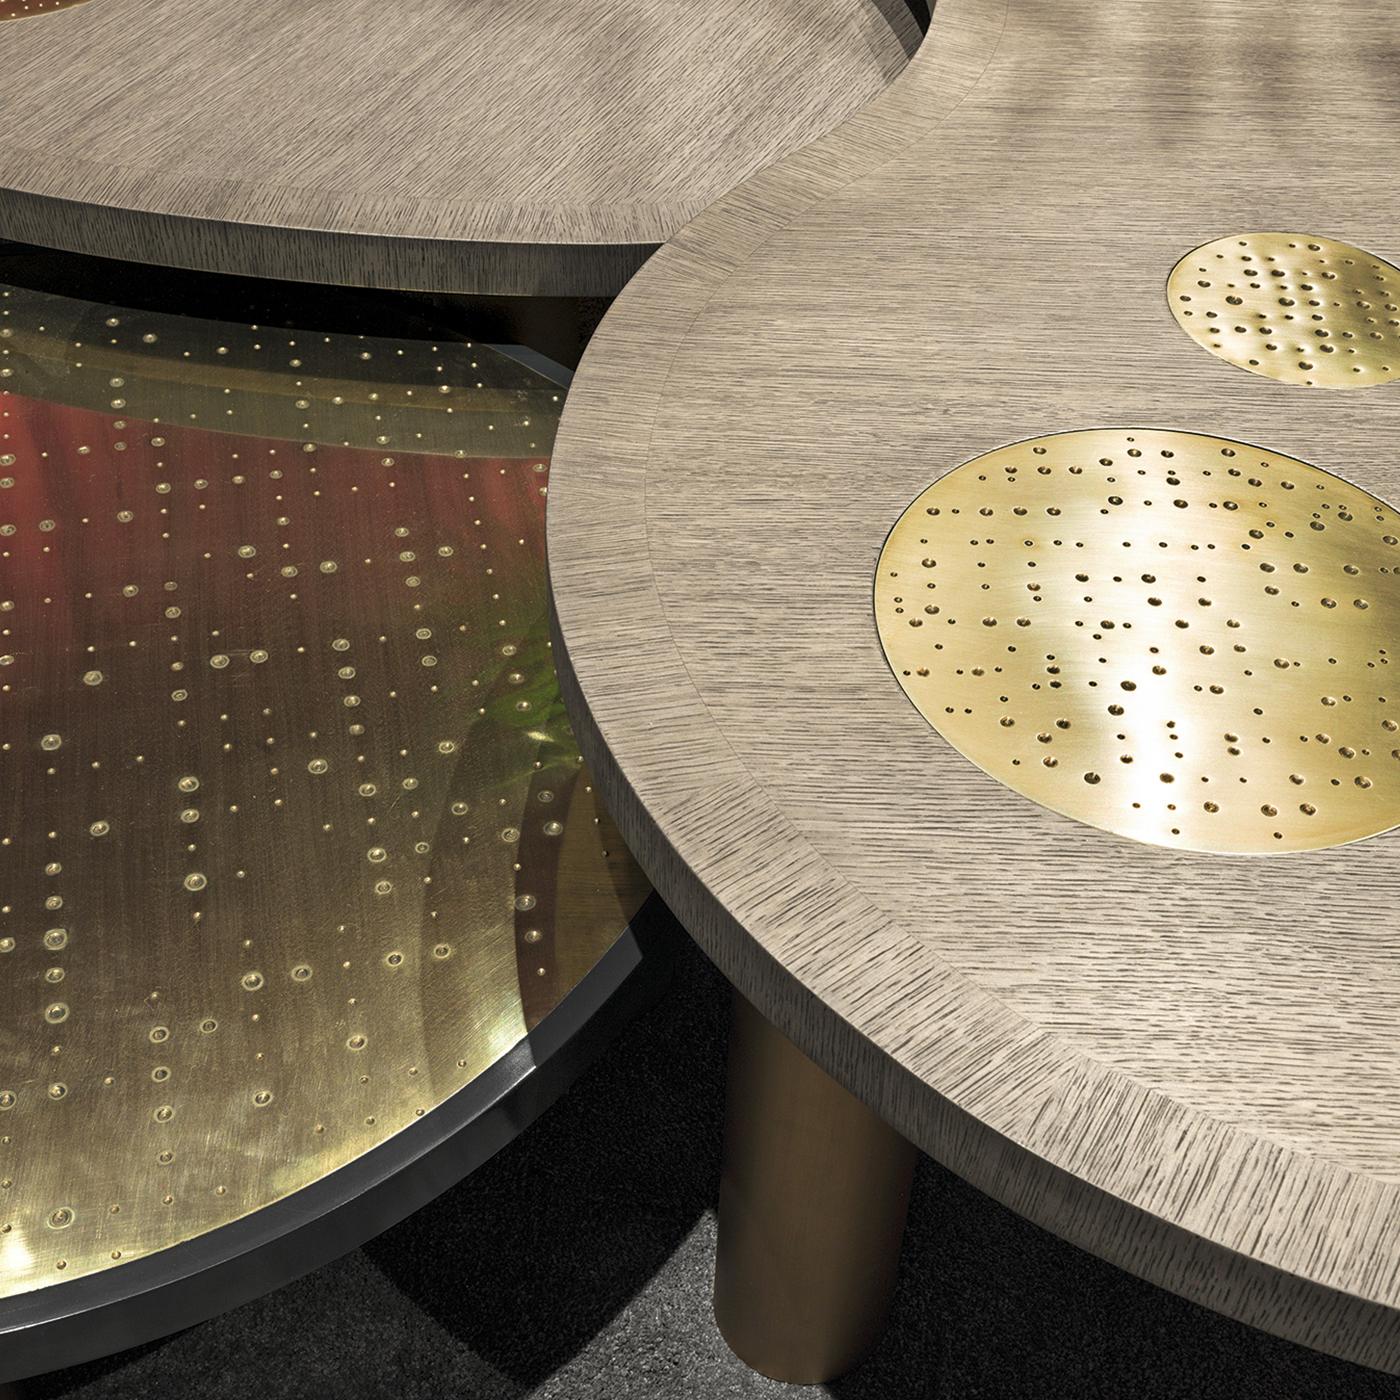 Fun and funky, the Jade Oblong coffee table takes the road less travelled in every style choice. From its curving abstract shape to its gray finish and bronze accents, the table's surface easily becomes the focal point of a contemporary living